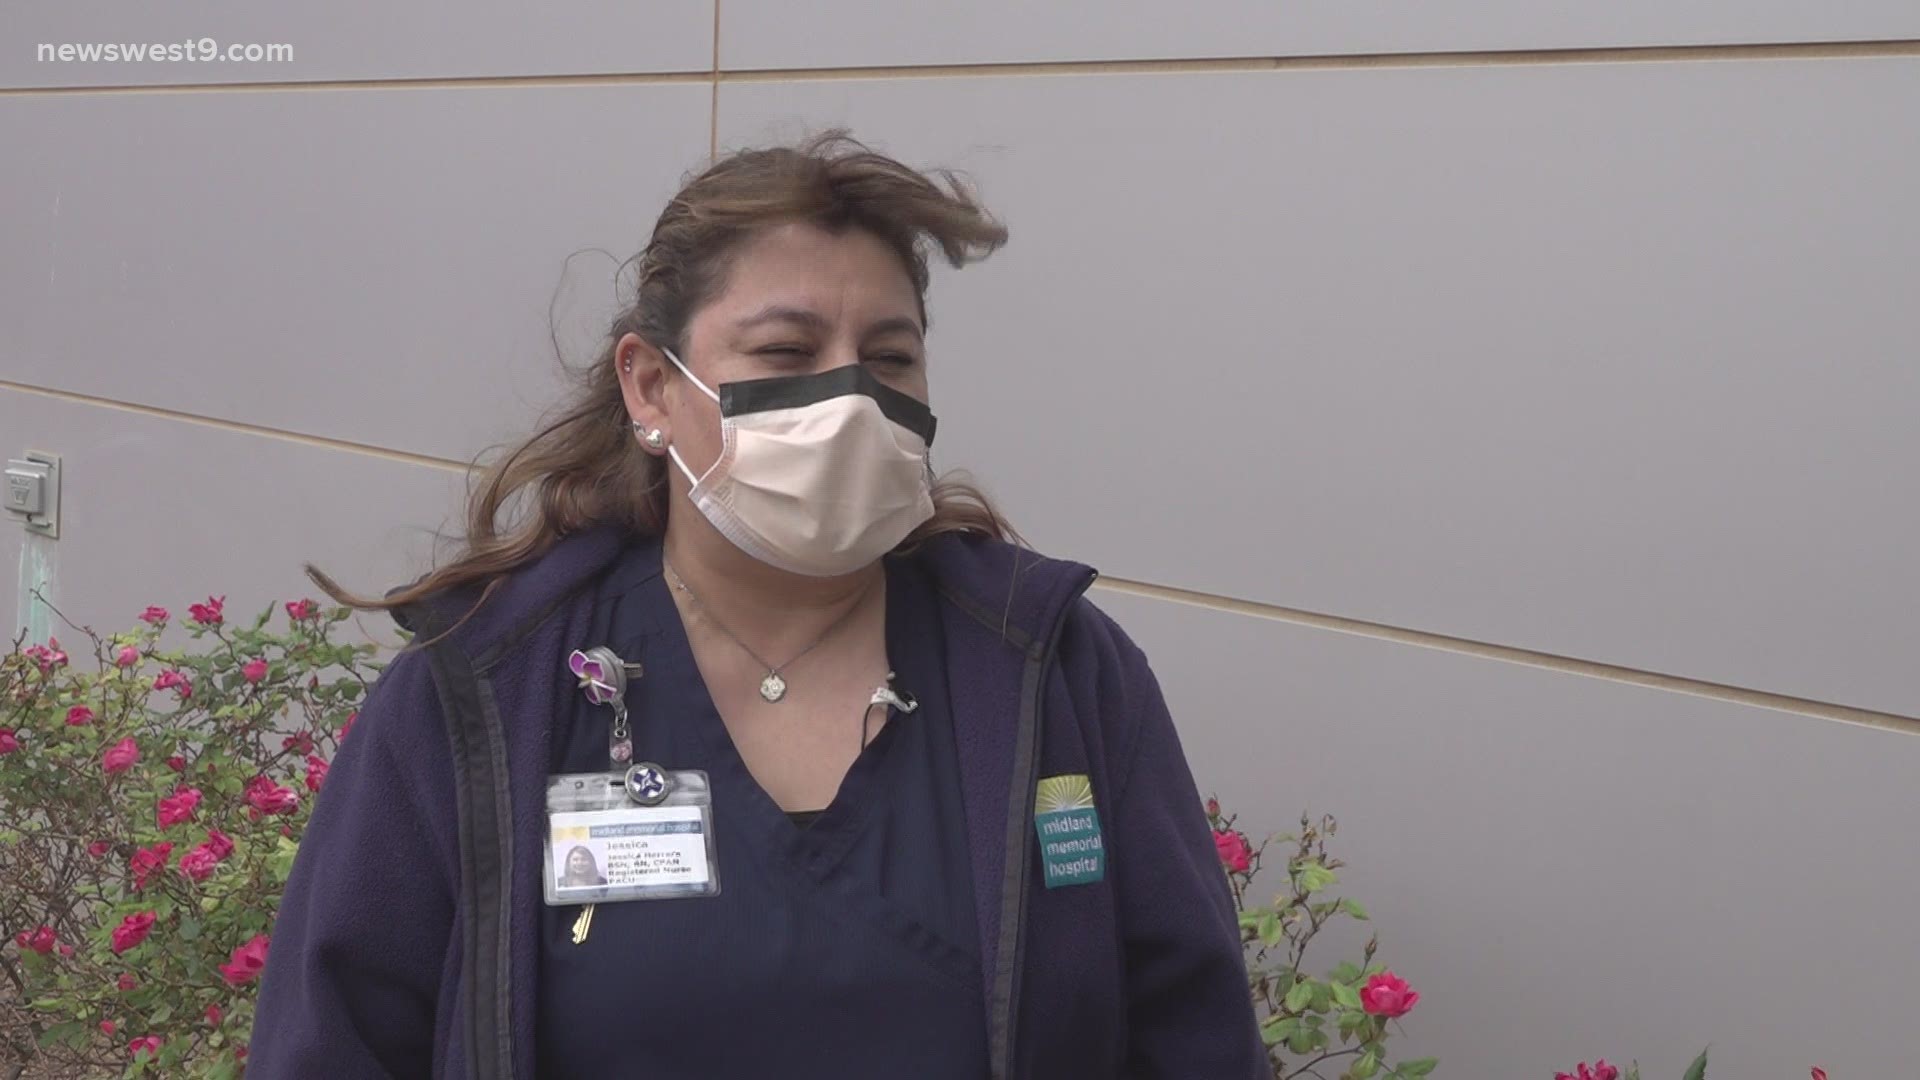 Jessica Herrera is a became a nurse because she wanted to help people but when the pandemic hit last year, she found herself having to make sure that she was okay.